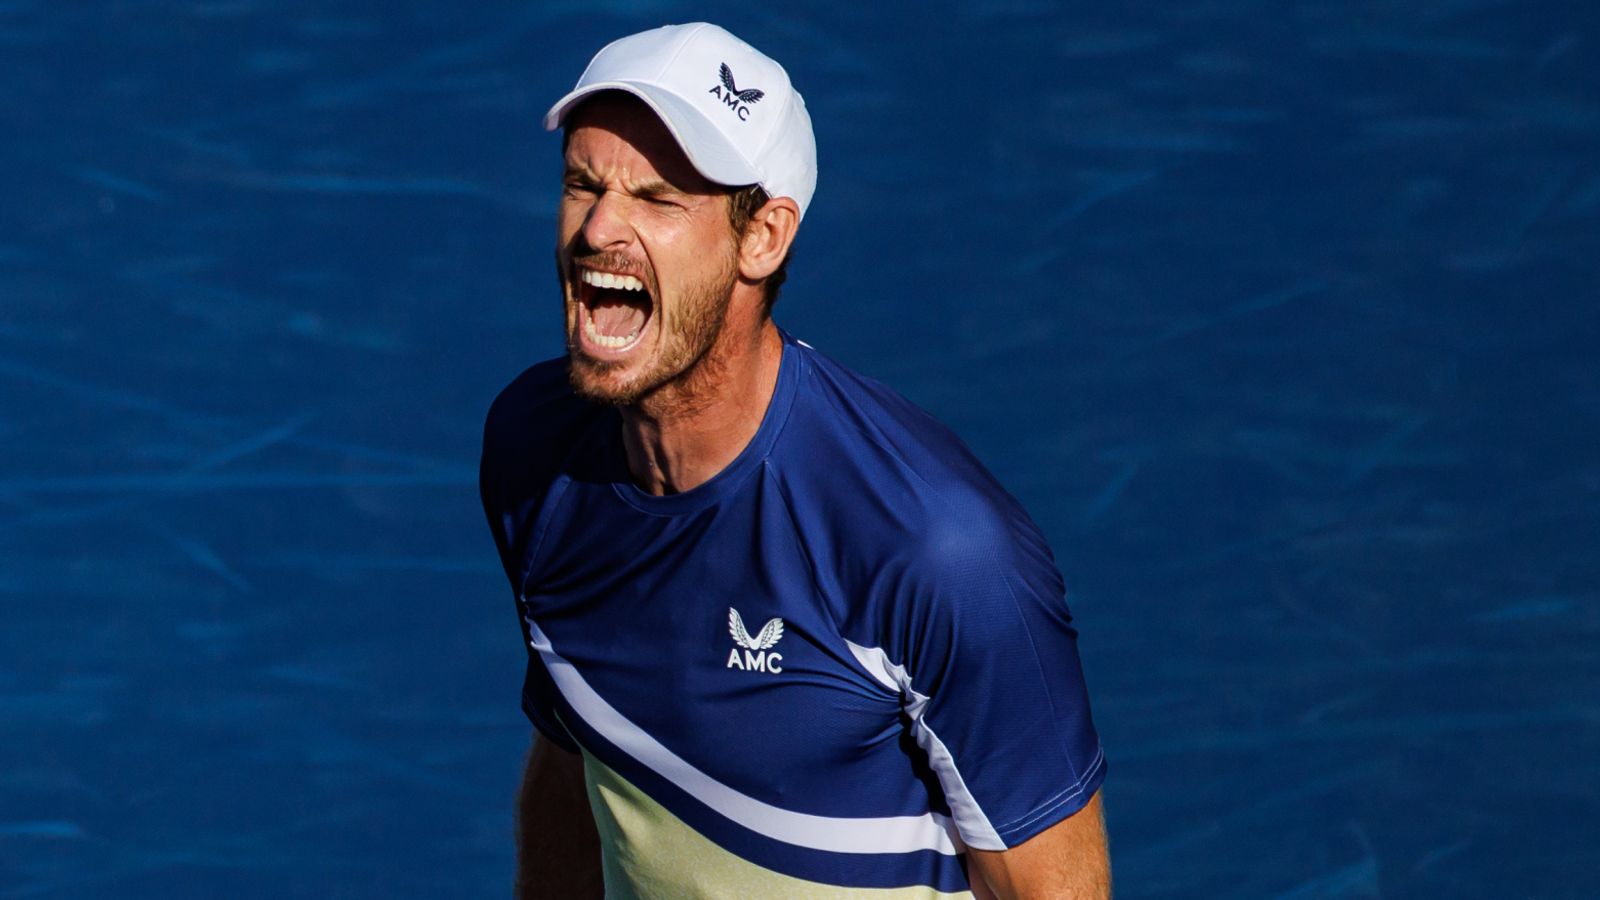 US Open: Andy Murray bids to resolve cramping issues ahead of Flushing Meadows